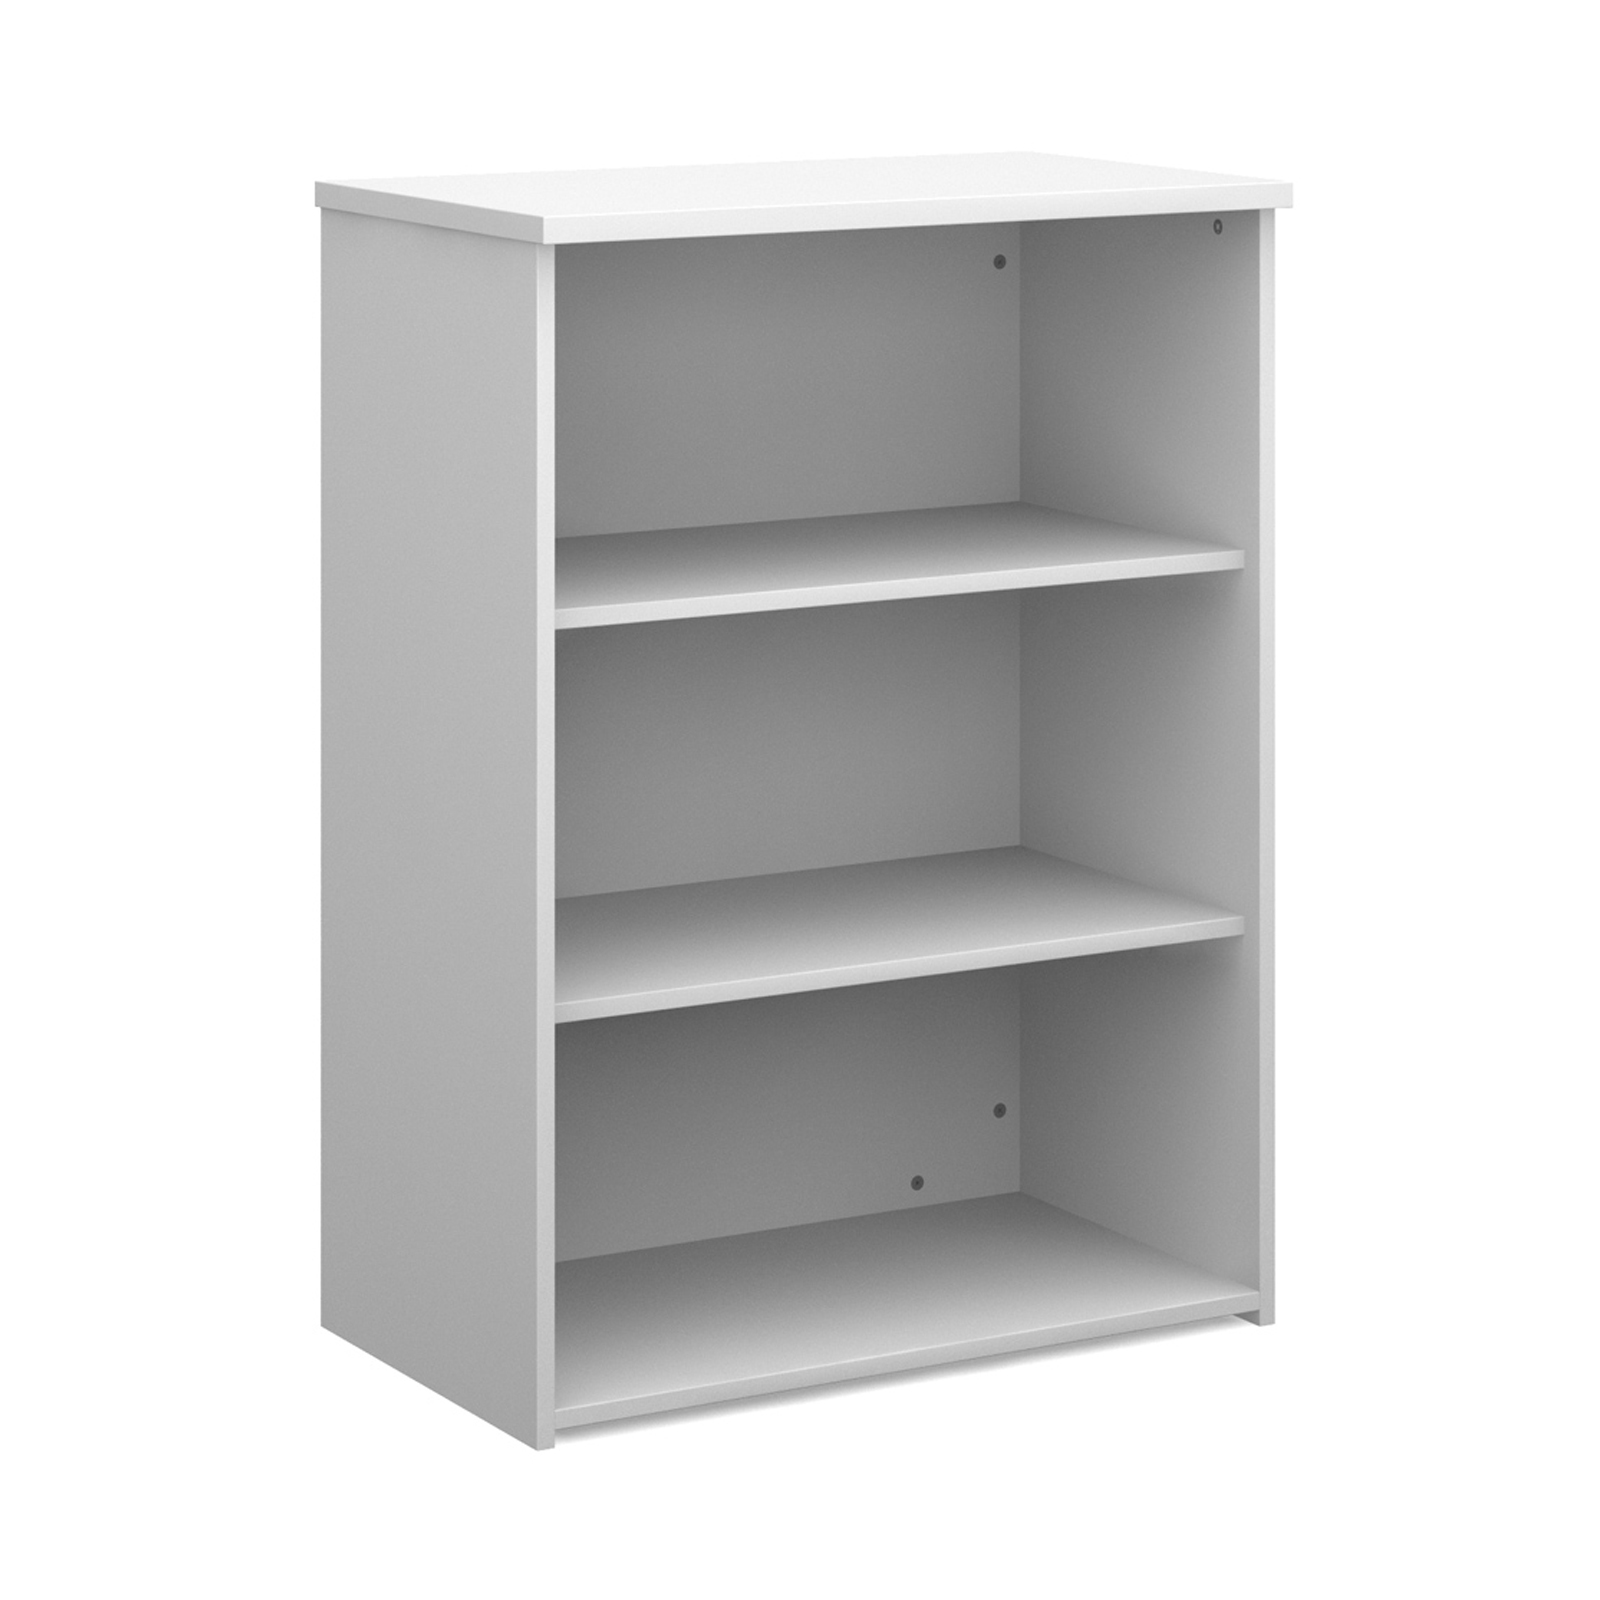 Up To 1200mm High Universal bookcase 1090mm high with 2 shelves - white